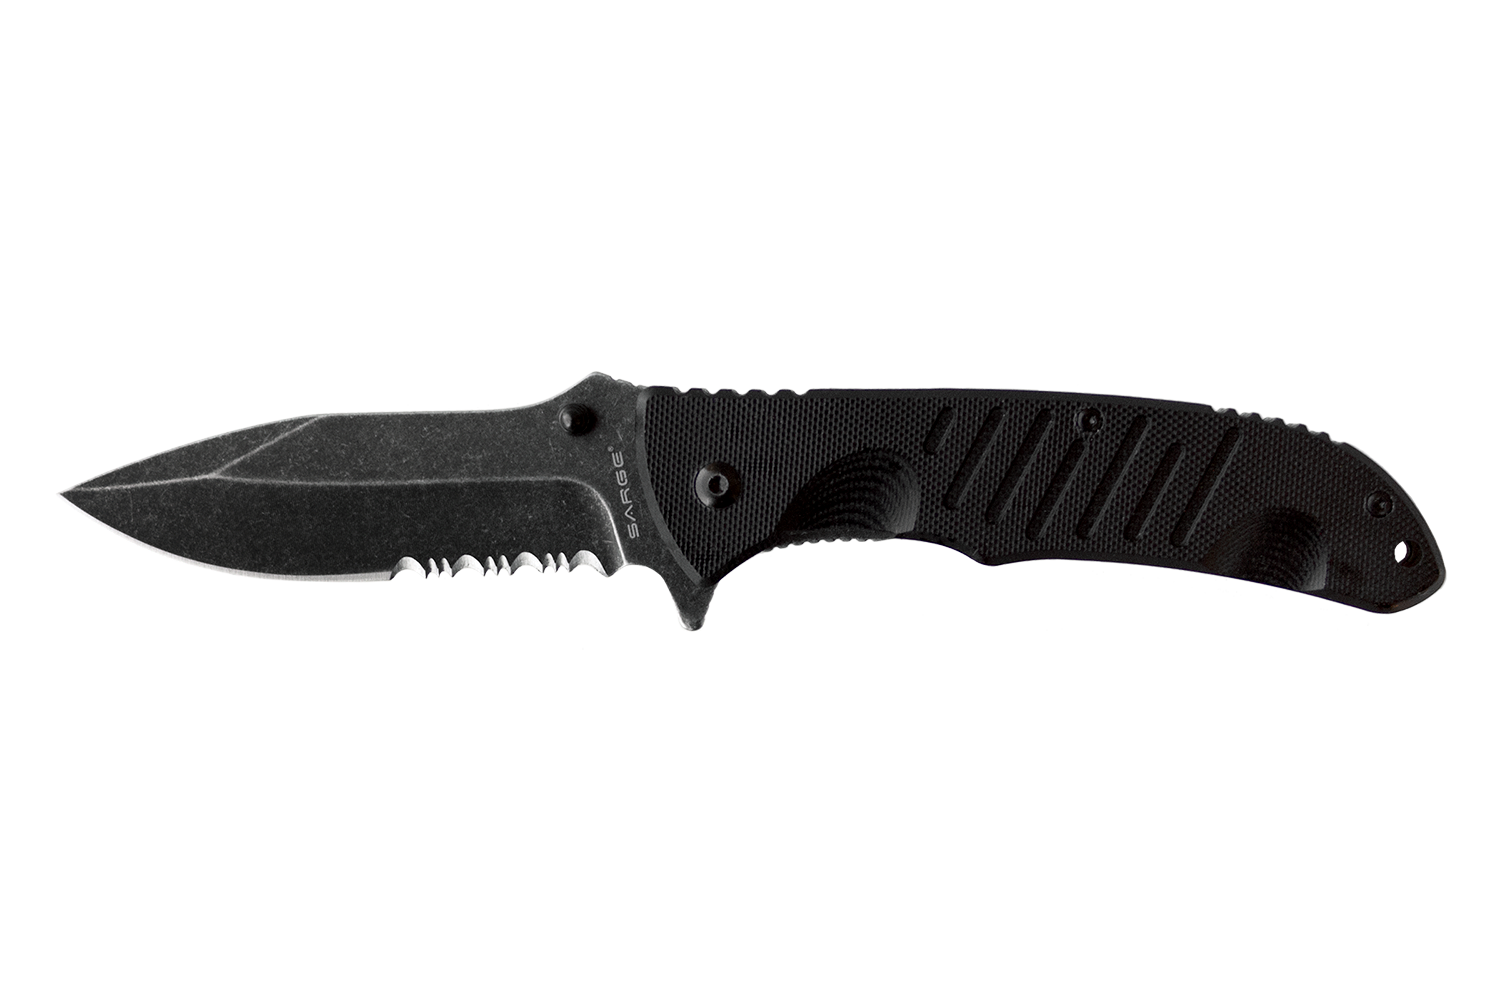 Sarge Knives | Quality Knife | Quality Knives - Sarge Knives